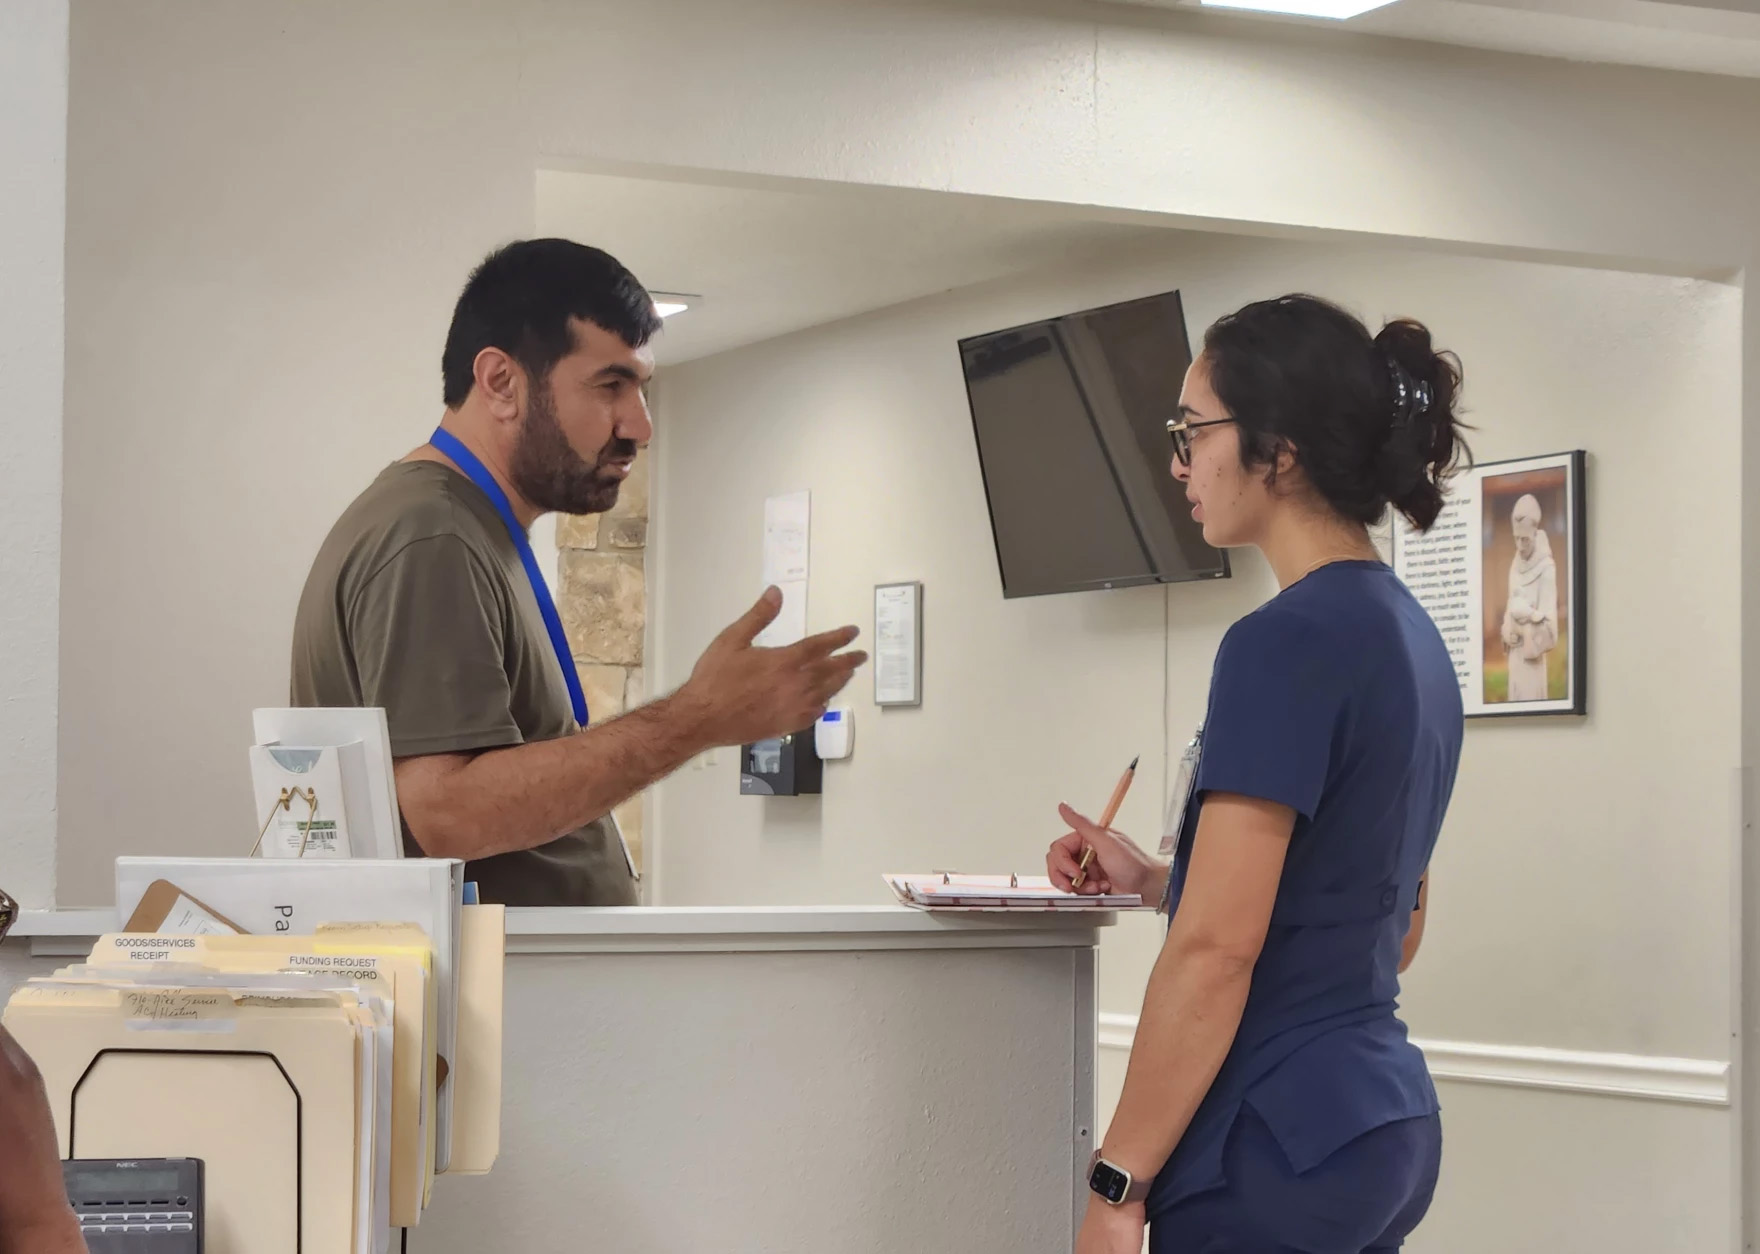 A bearded man in scrubs speaks to a woman, also in scrubs, at the counter at a medical clinic. The man is Chinar Sedeqi.